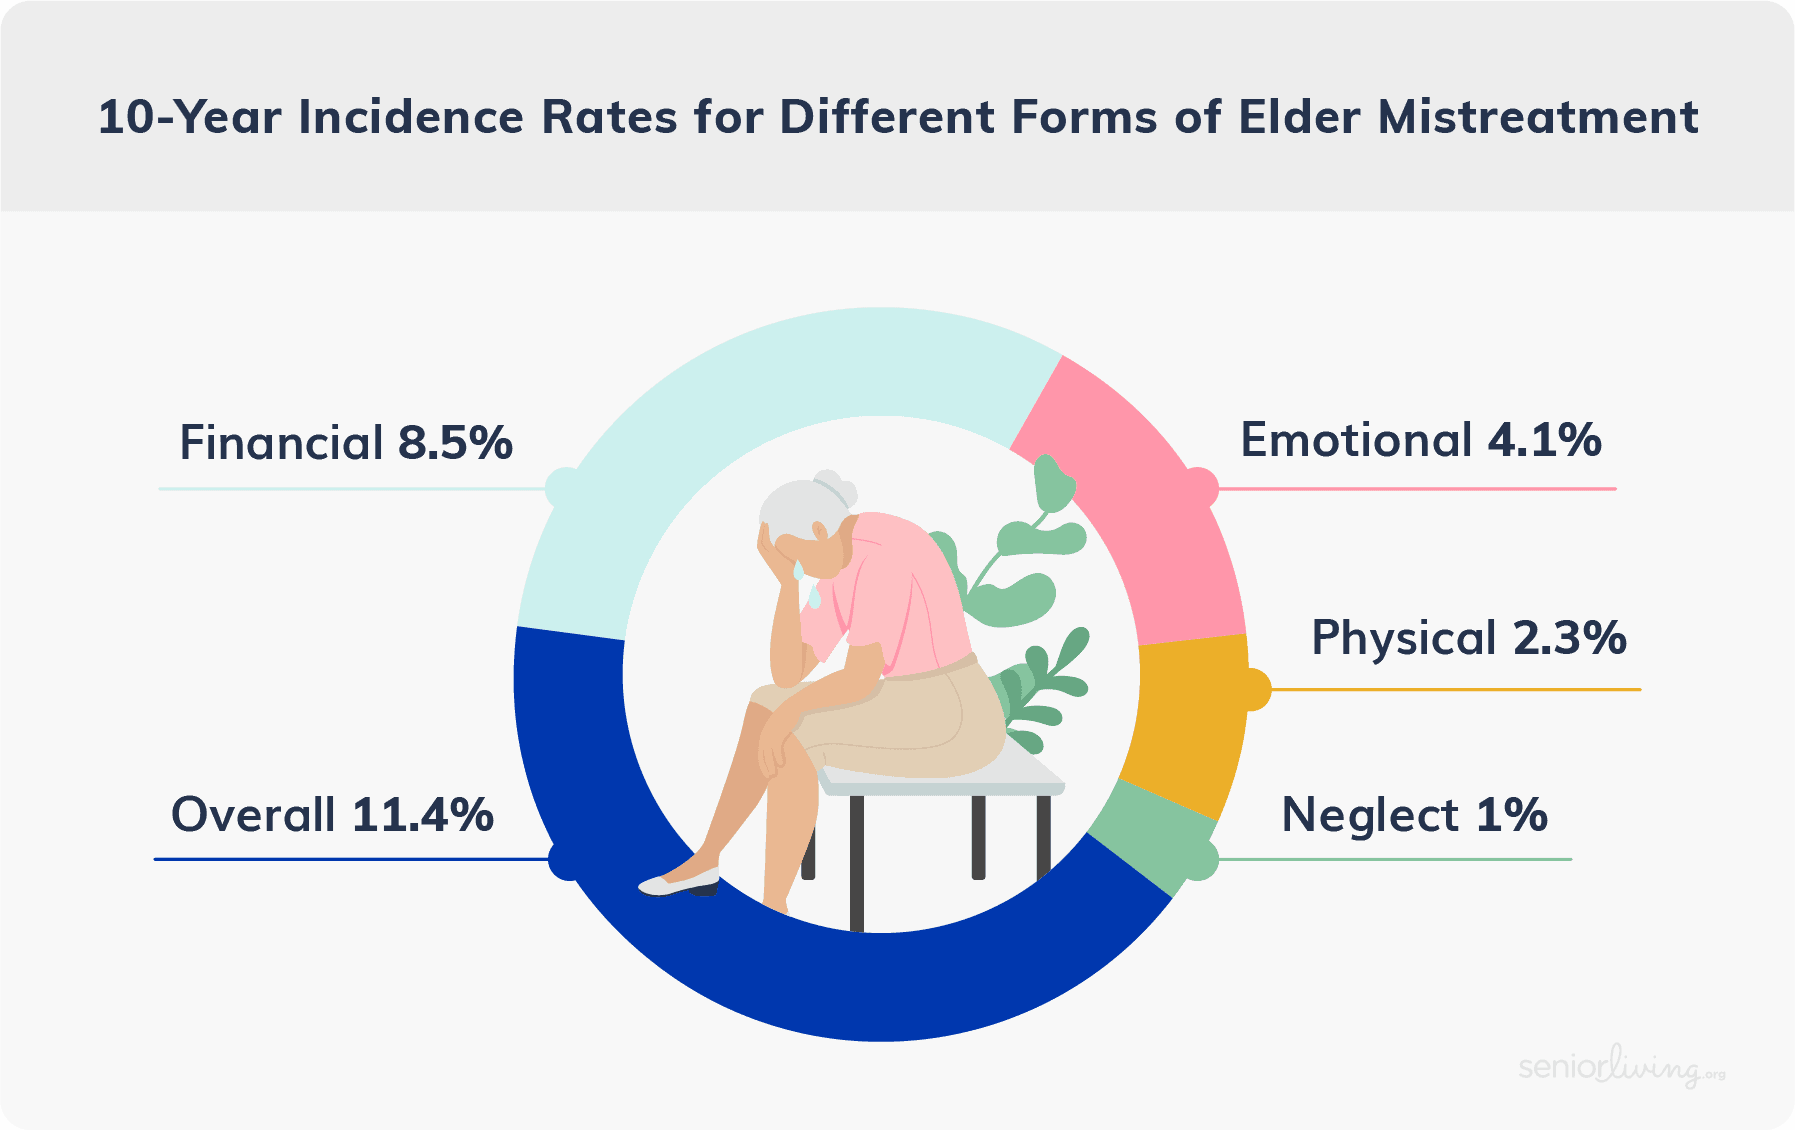 10-Year Incidence Rates for Different Forms of Elder Mistreatment